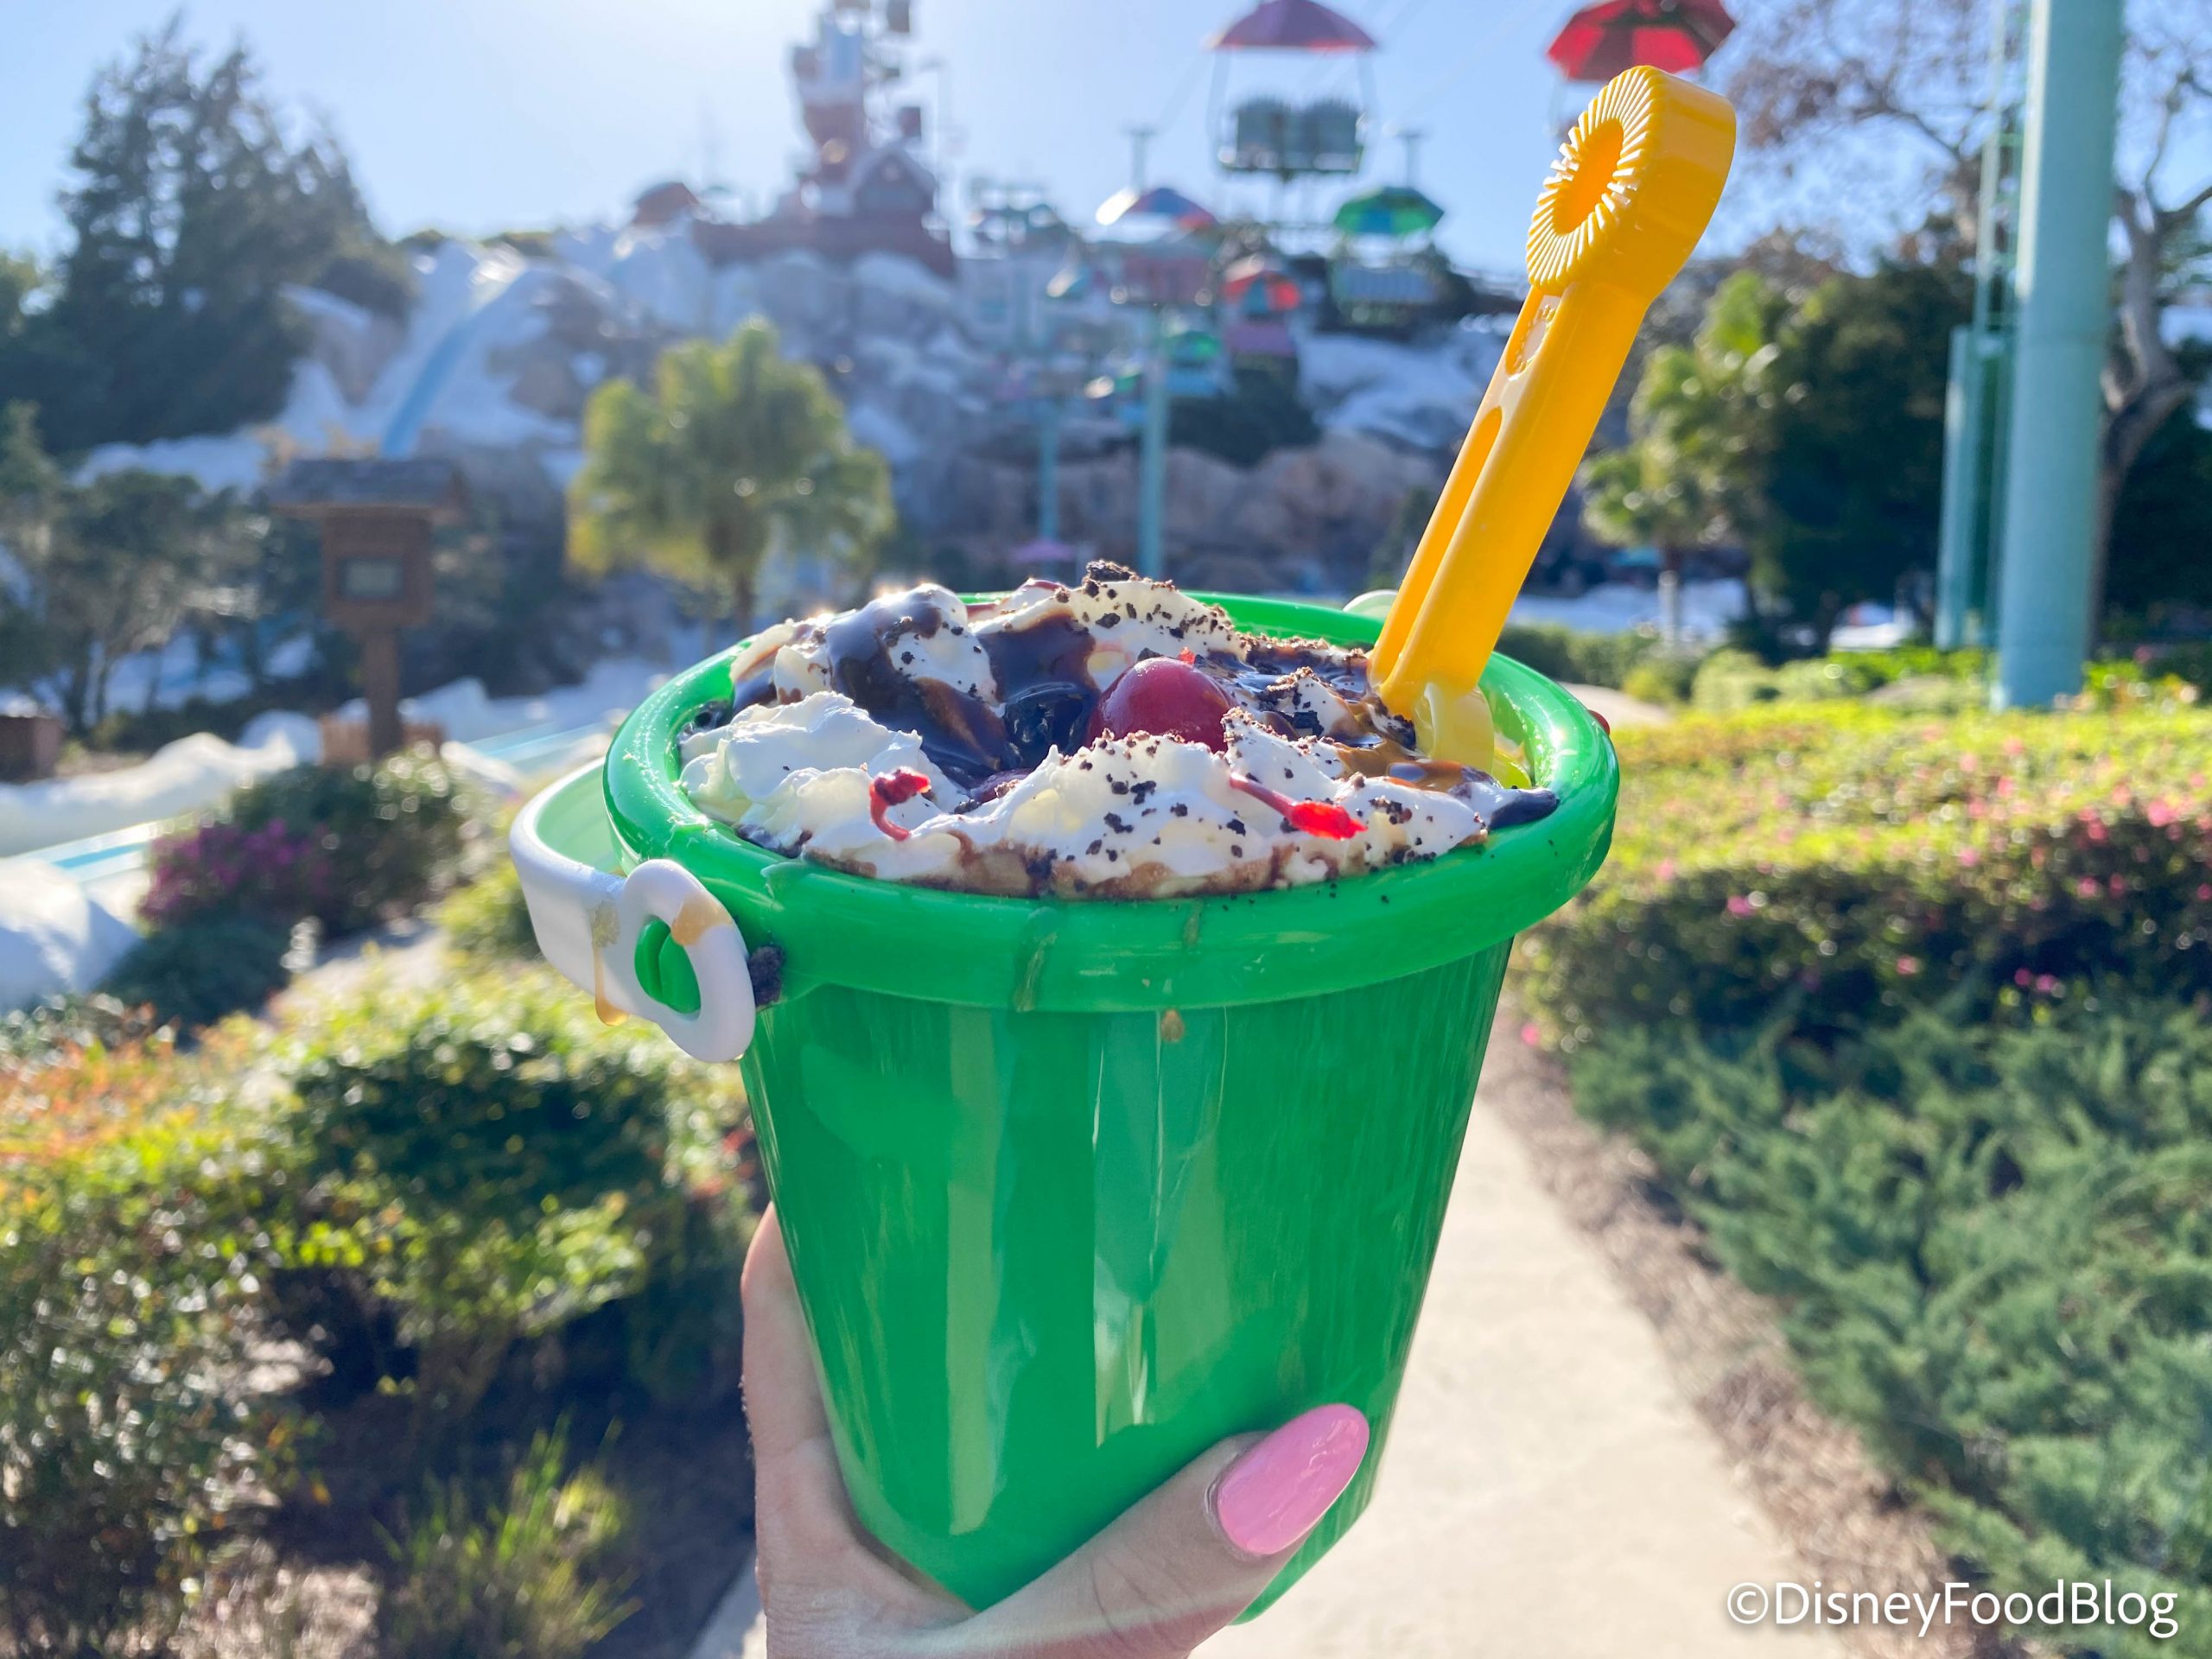 REVIEW: We Had a WHOLE BUCKET of Ice Cream at Disney's Blizzard Beach